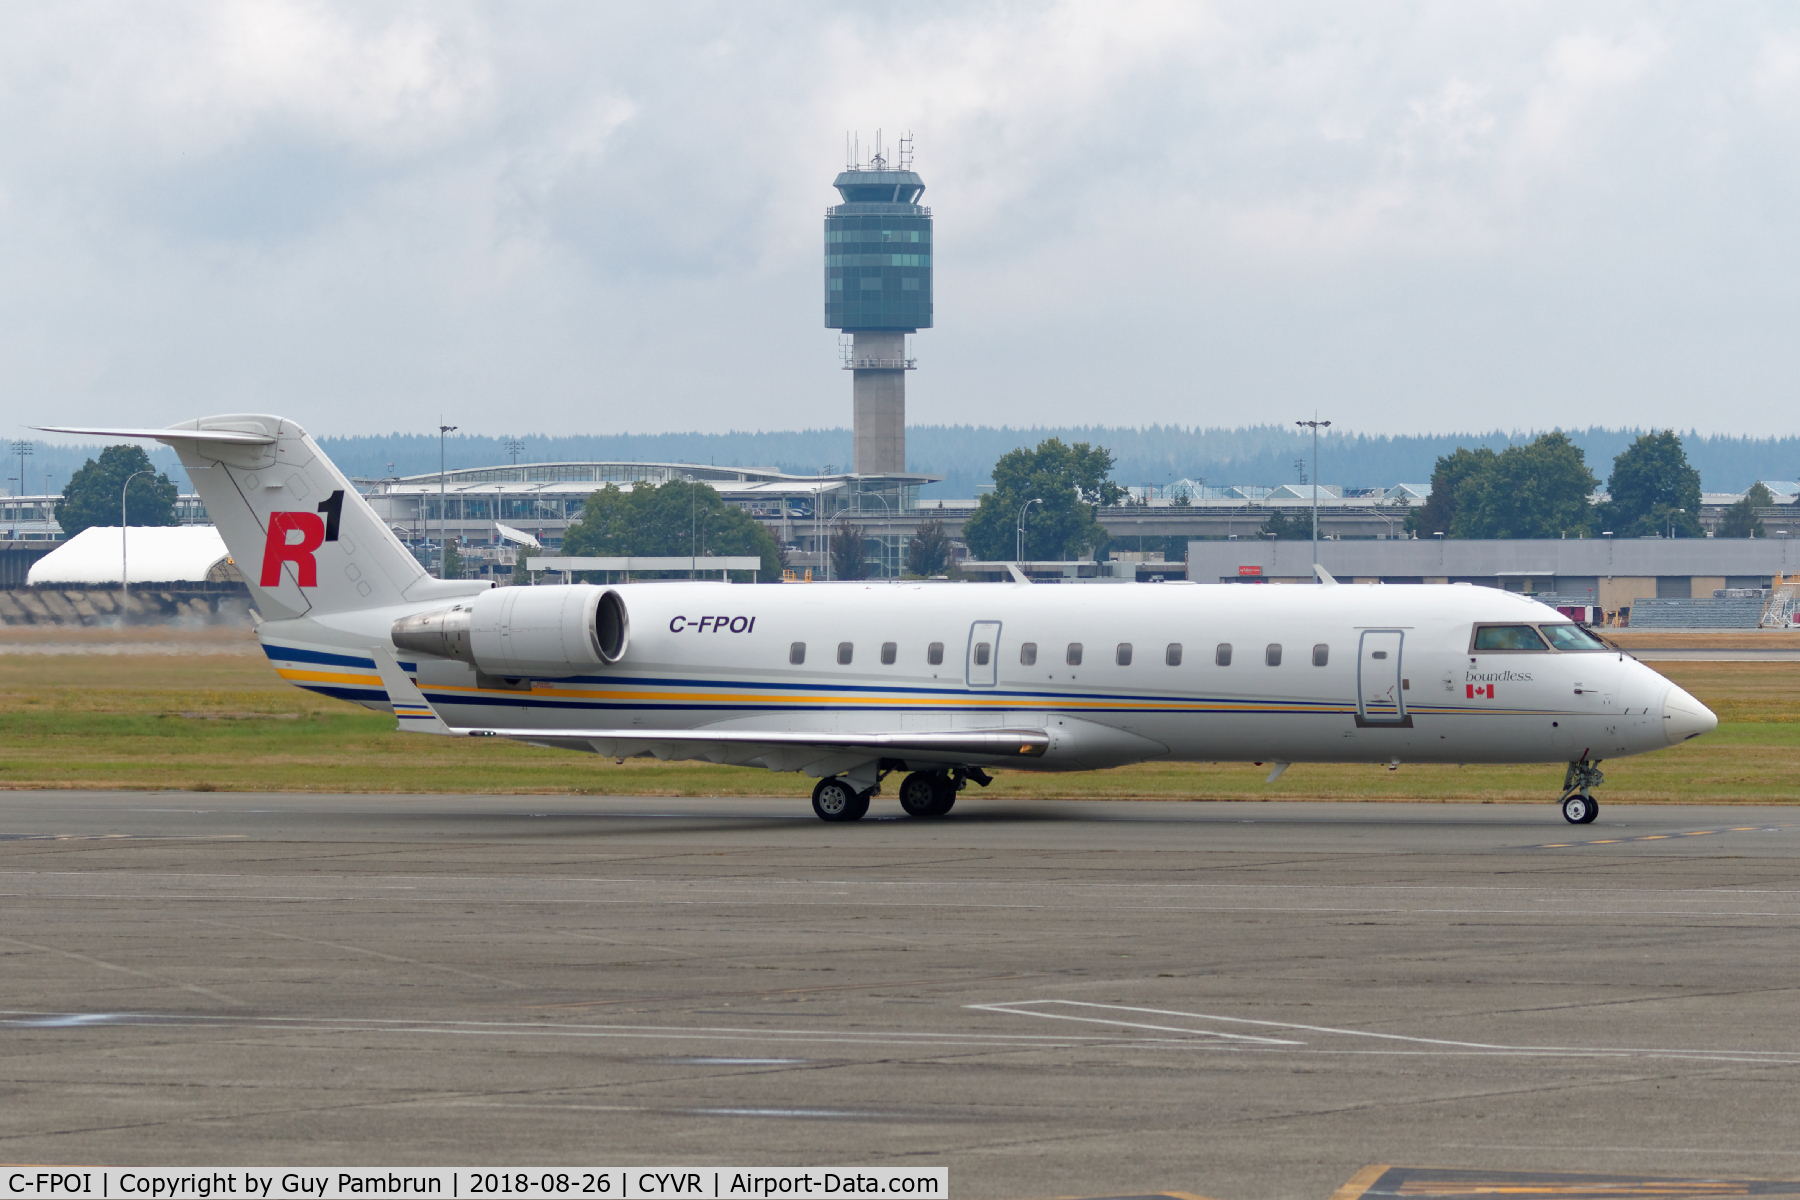 C-FPOI, 2005 Bombardier Challenger 850 (CL-600-2B19) C/N 8047, Just landed